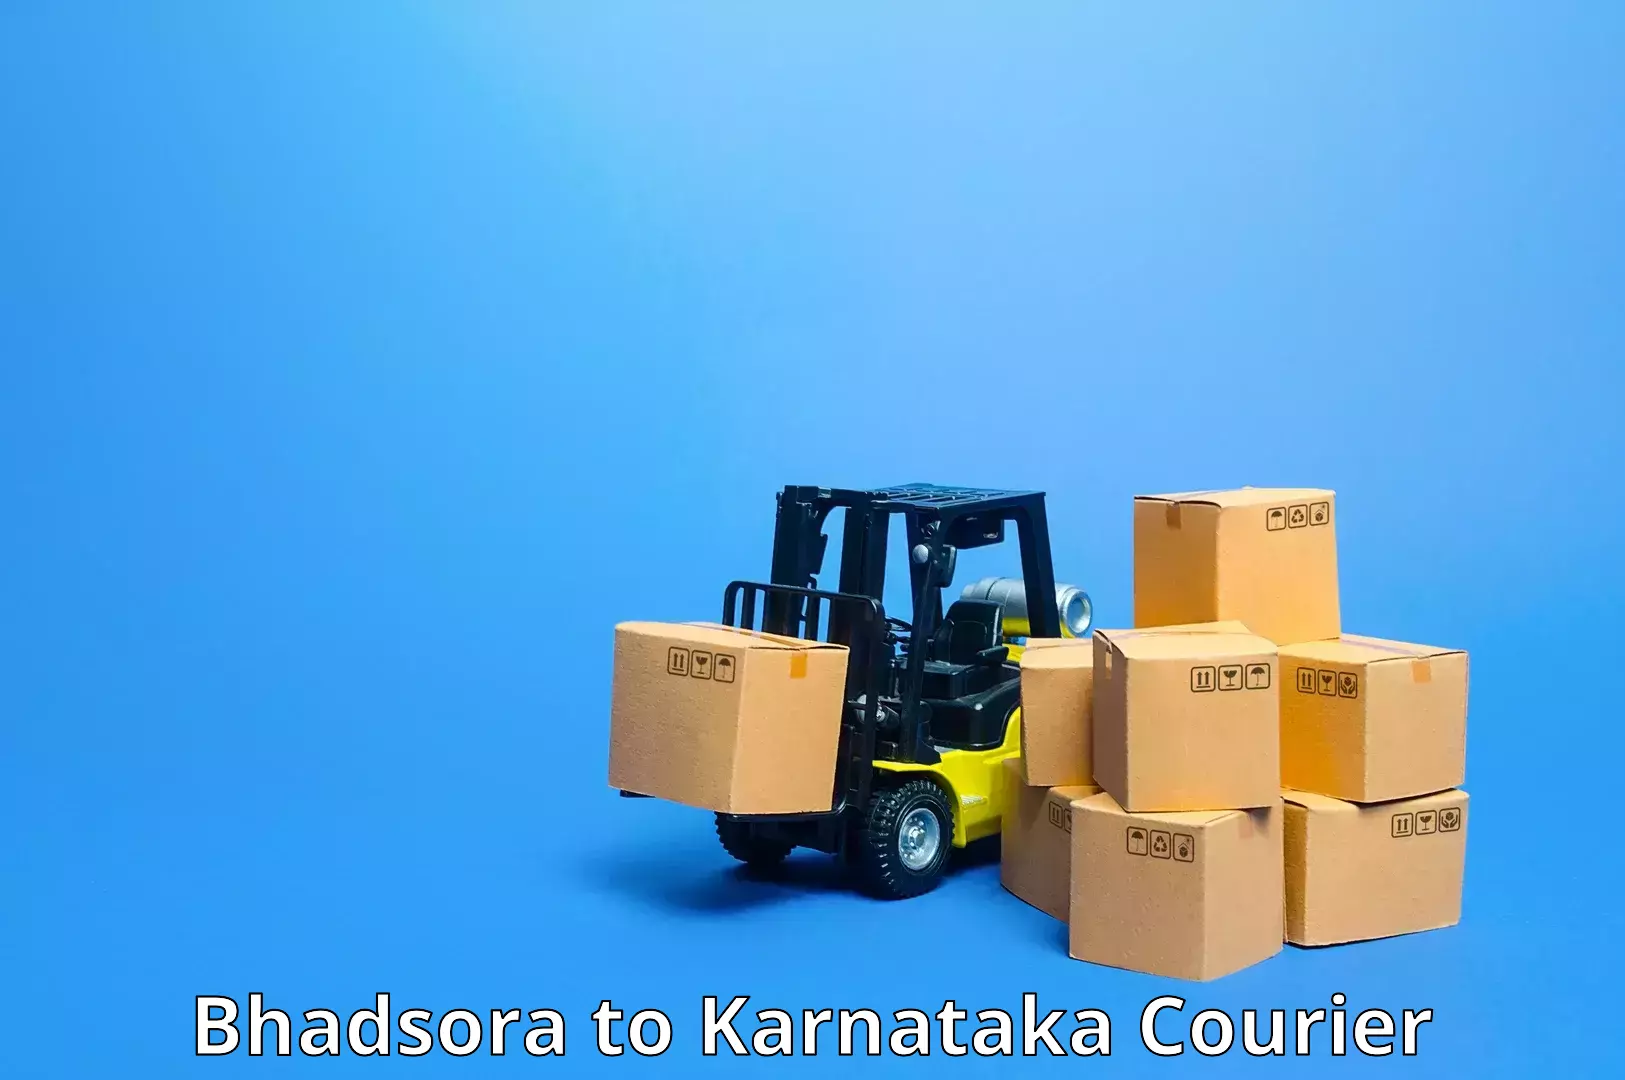 Global courier networks Bhadsora to Channagiri